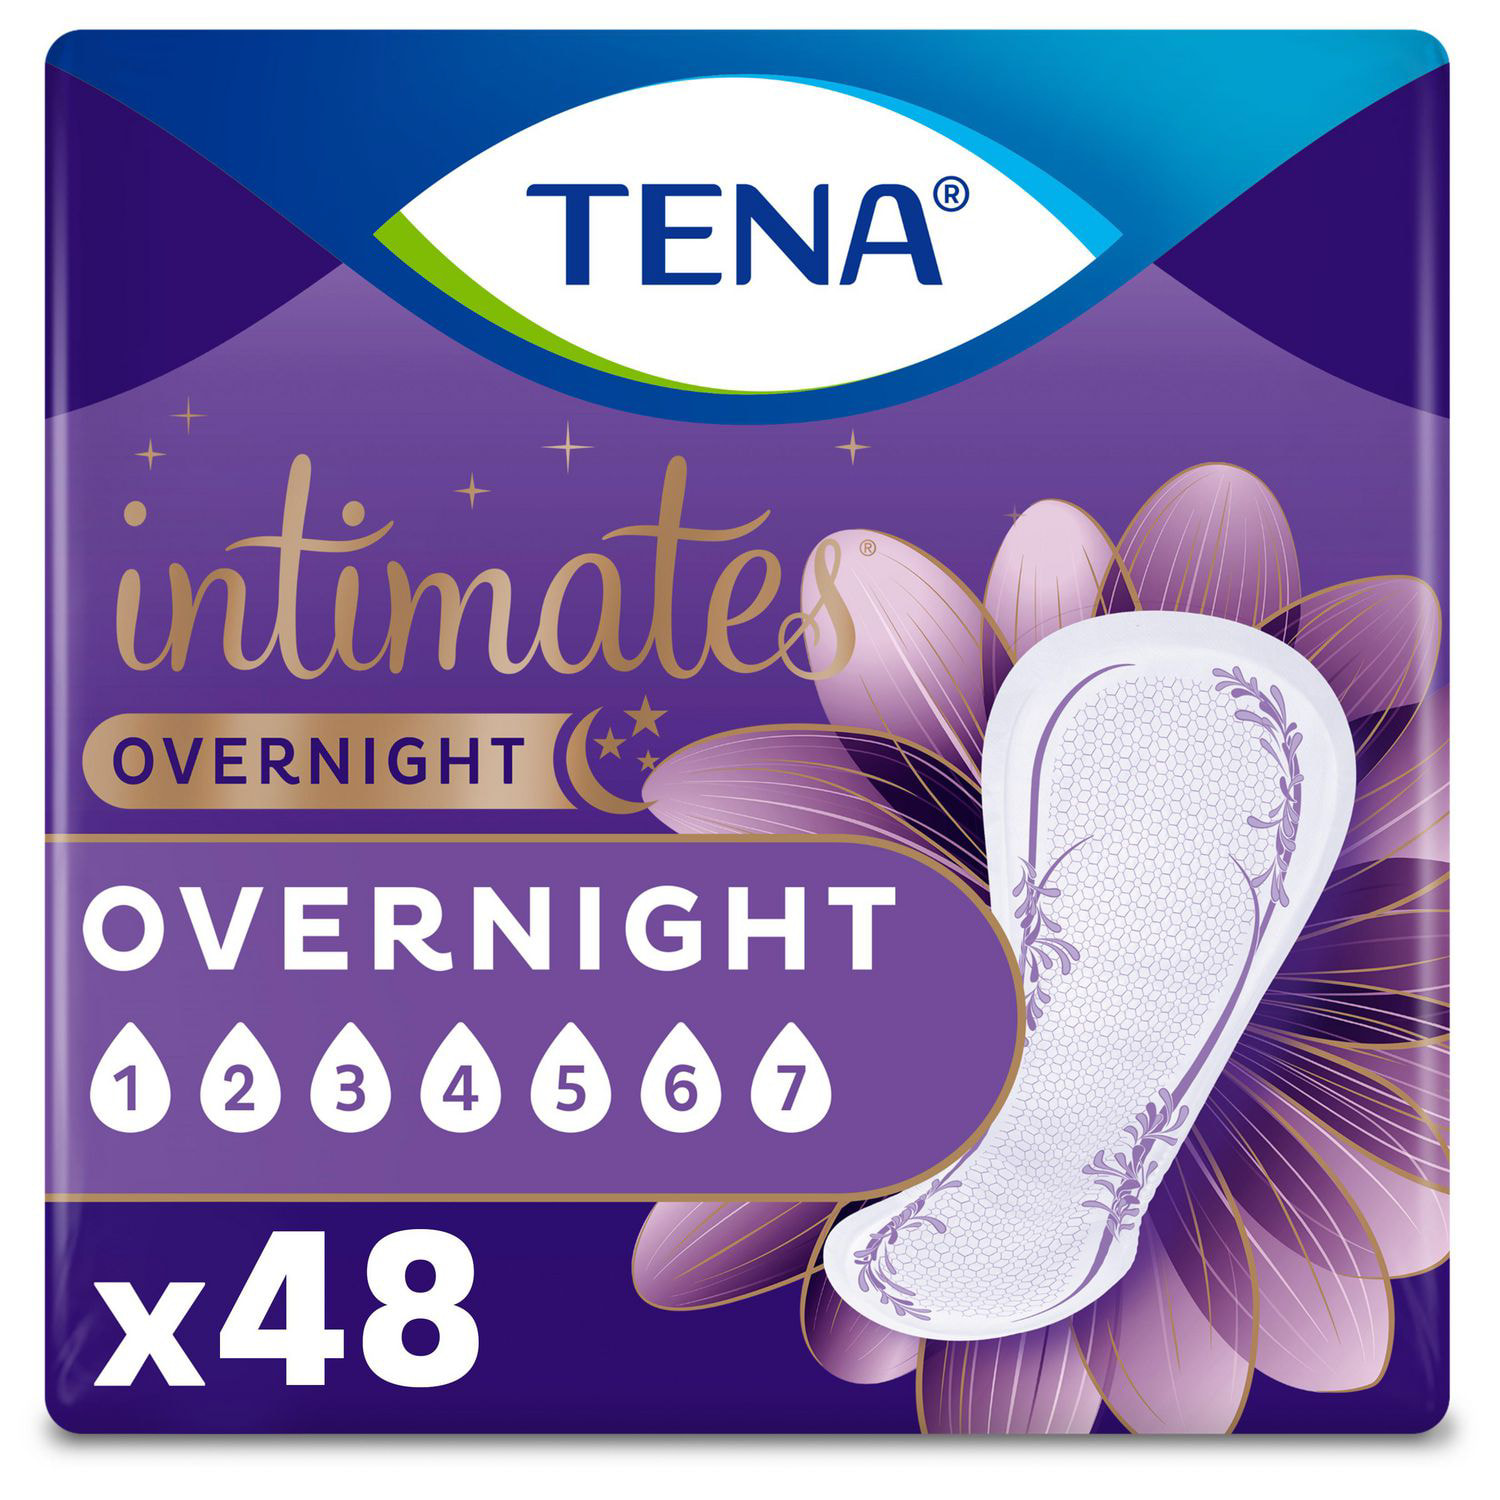 Tena Proskin Incontinence Underwear For Women With Moderate